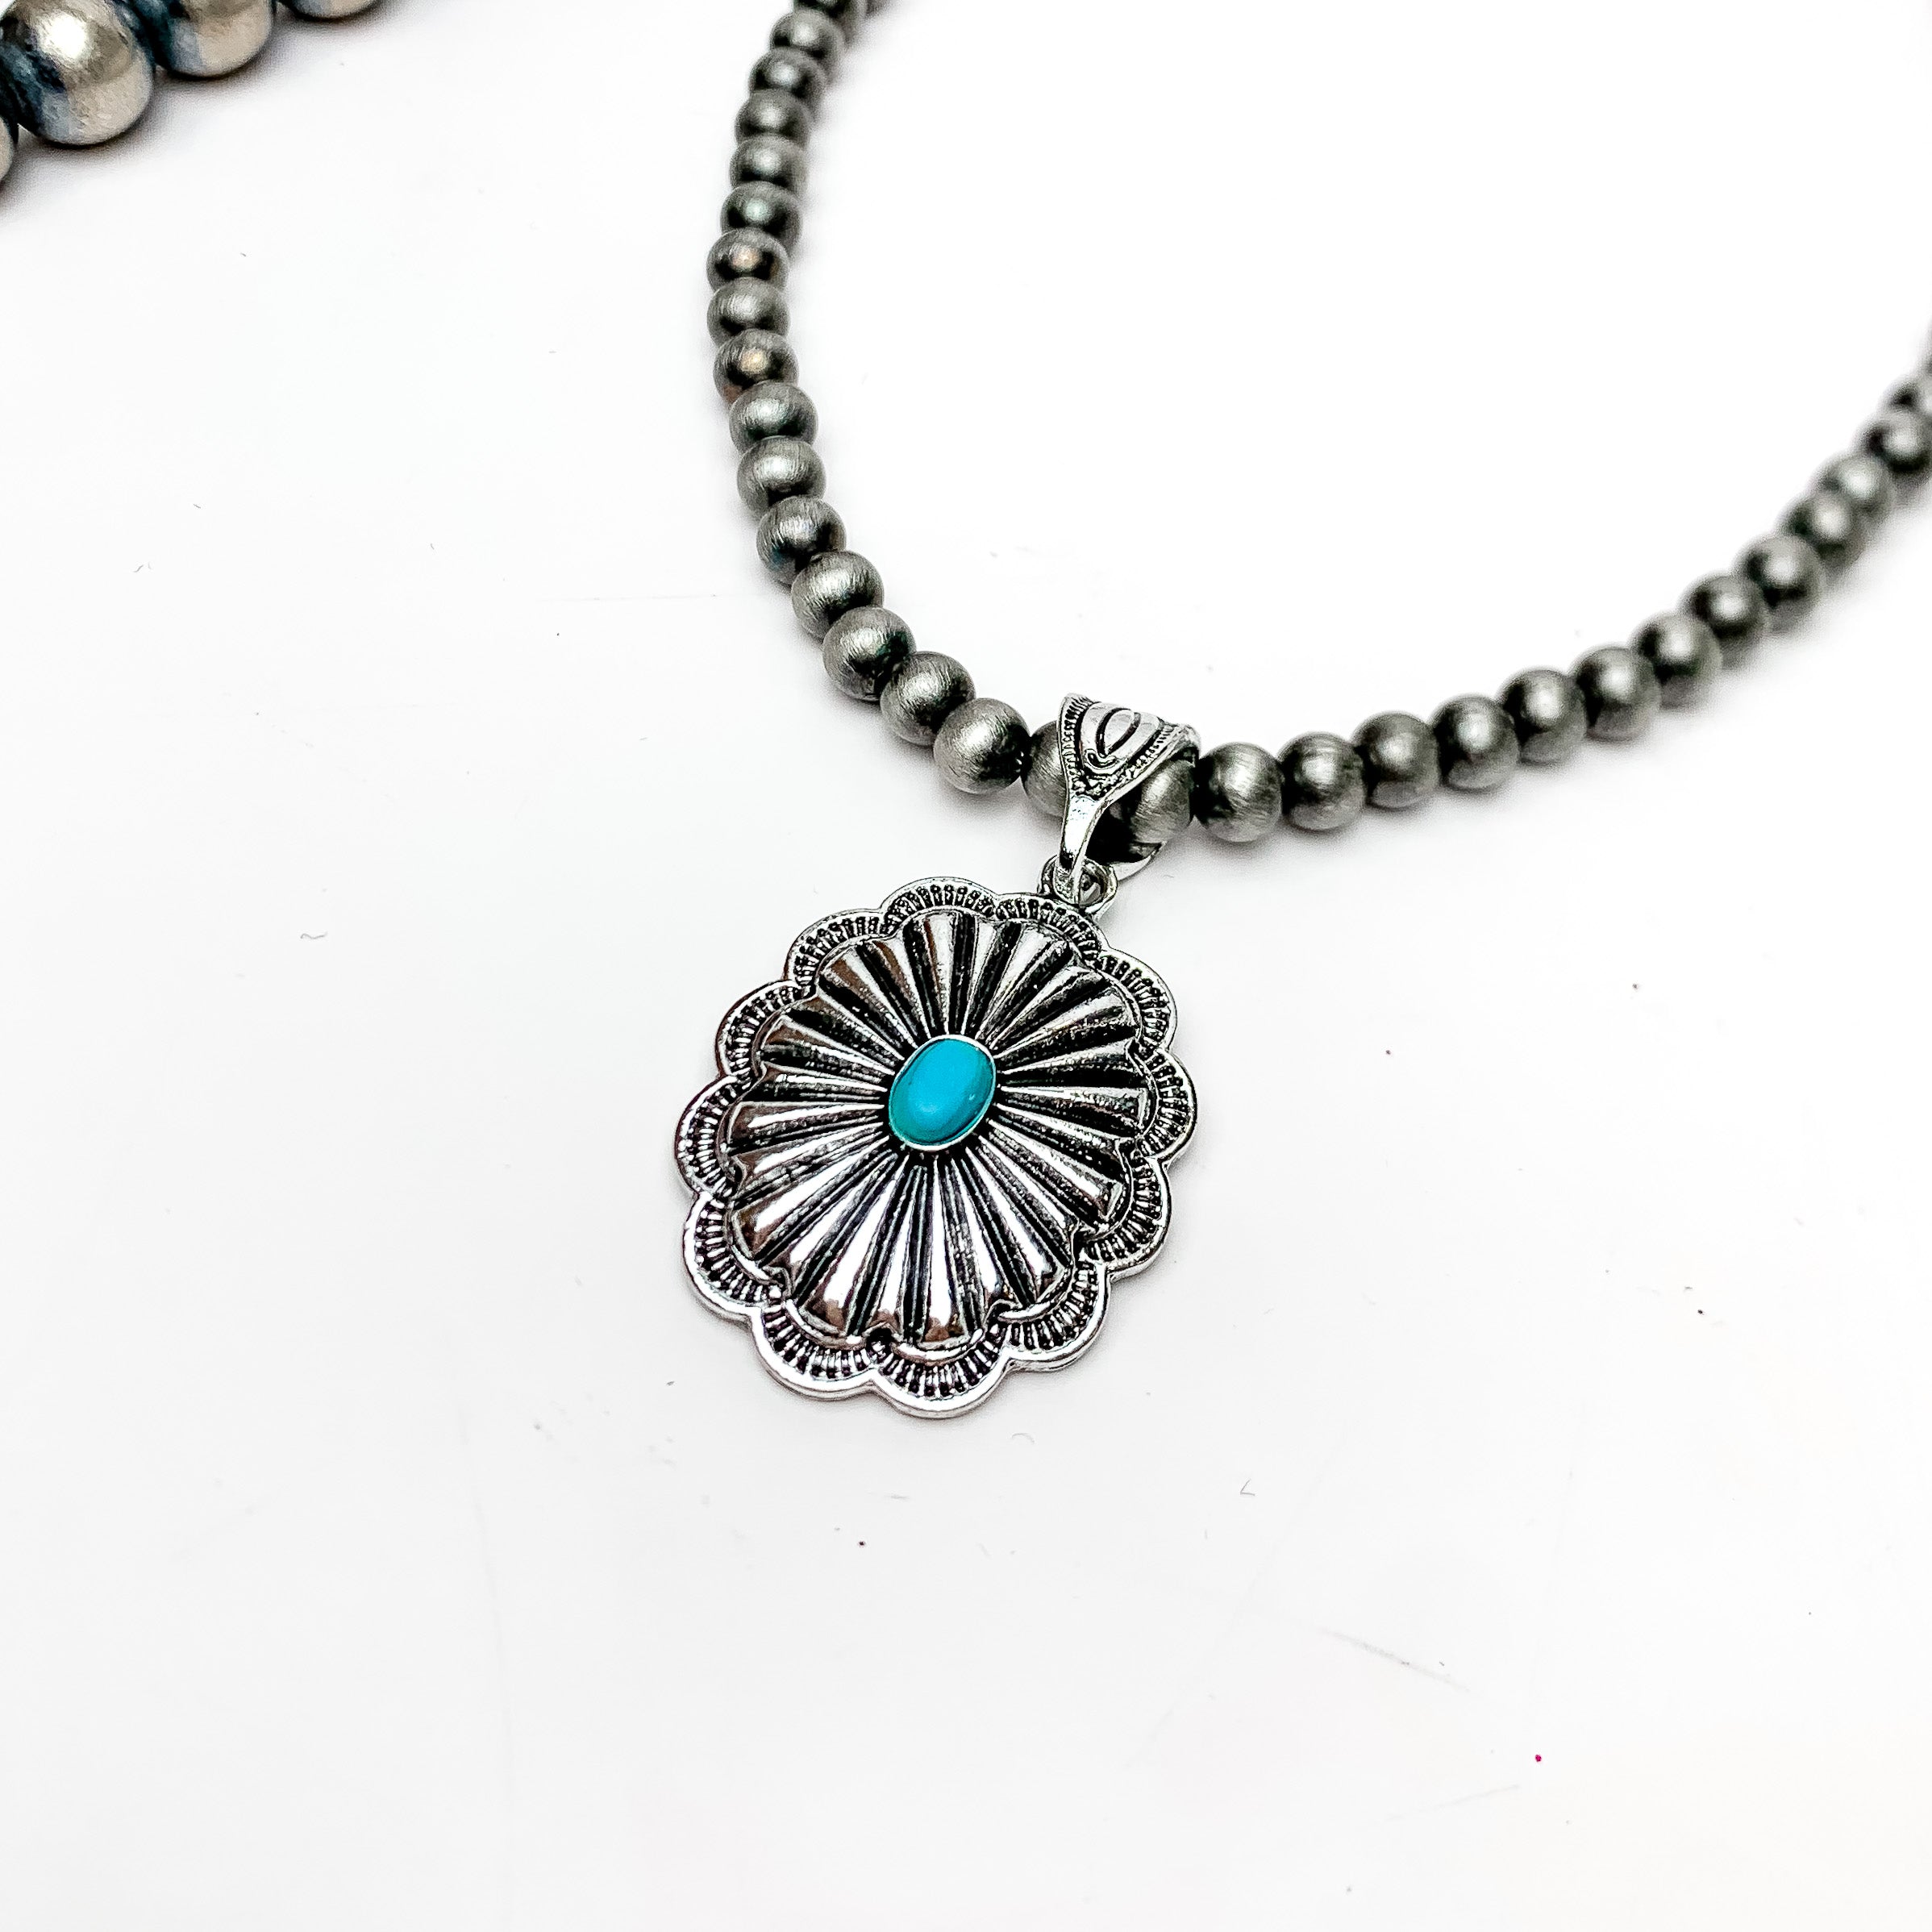 Silver Tone Pearl Necklace Featuring a Pendent With Turquoise Blue Stone - Giddy Up Glamour Boutique